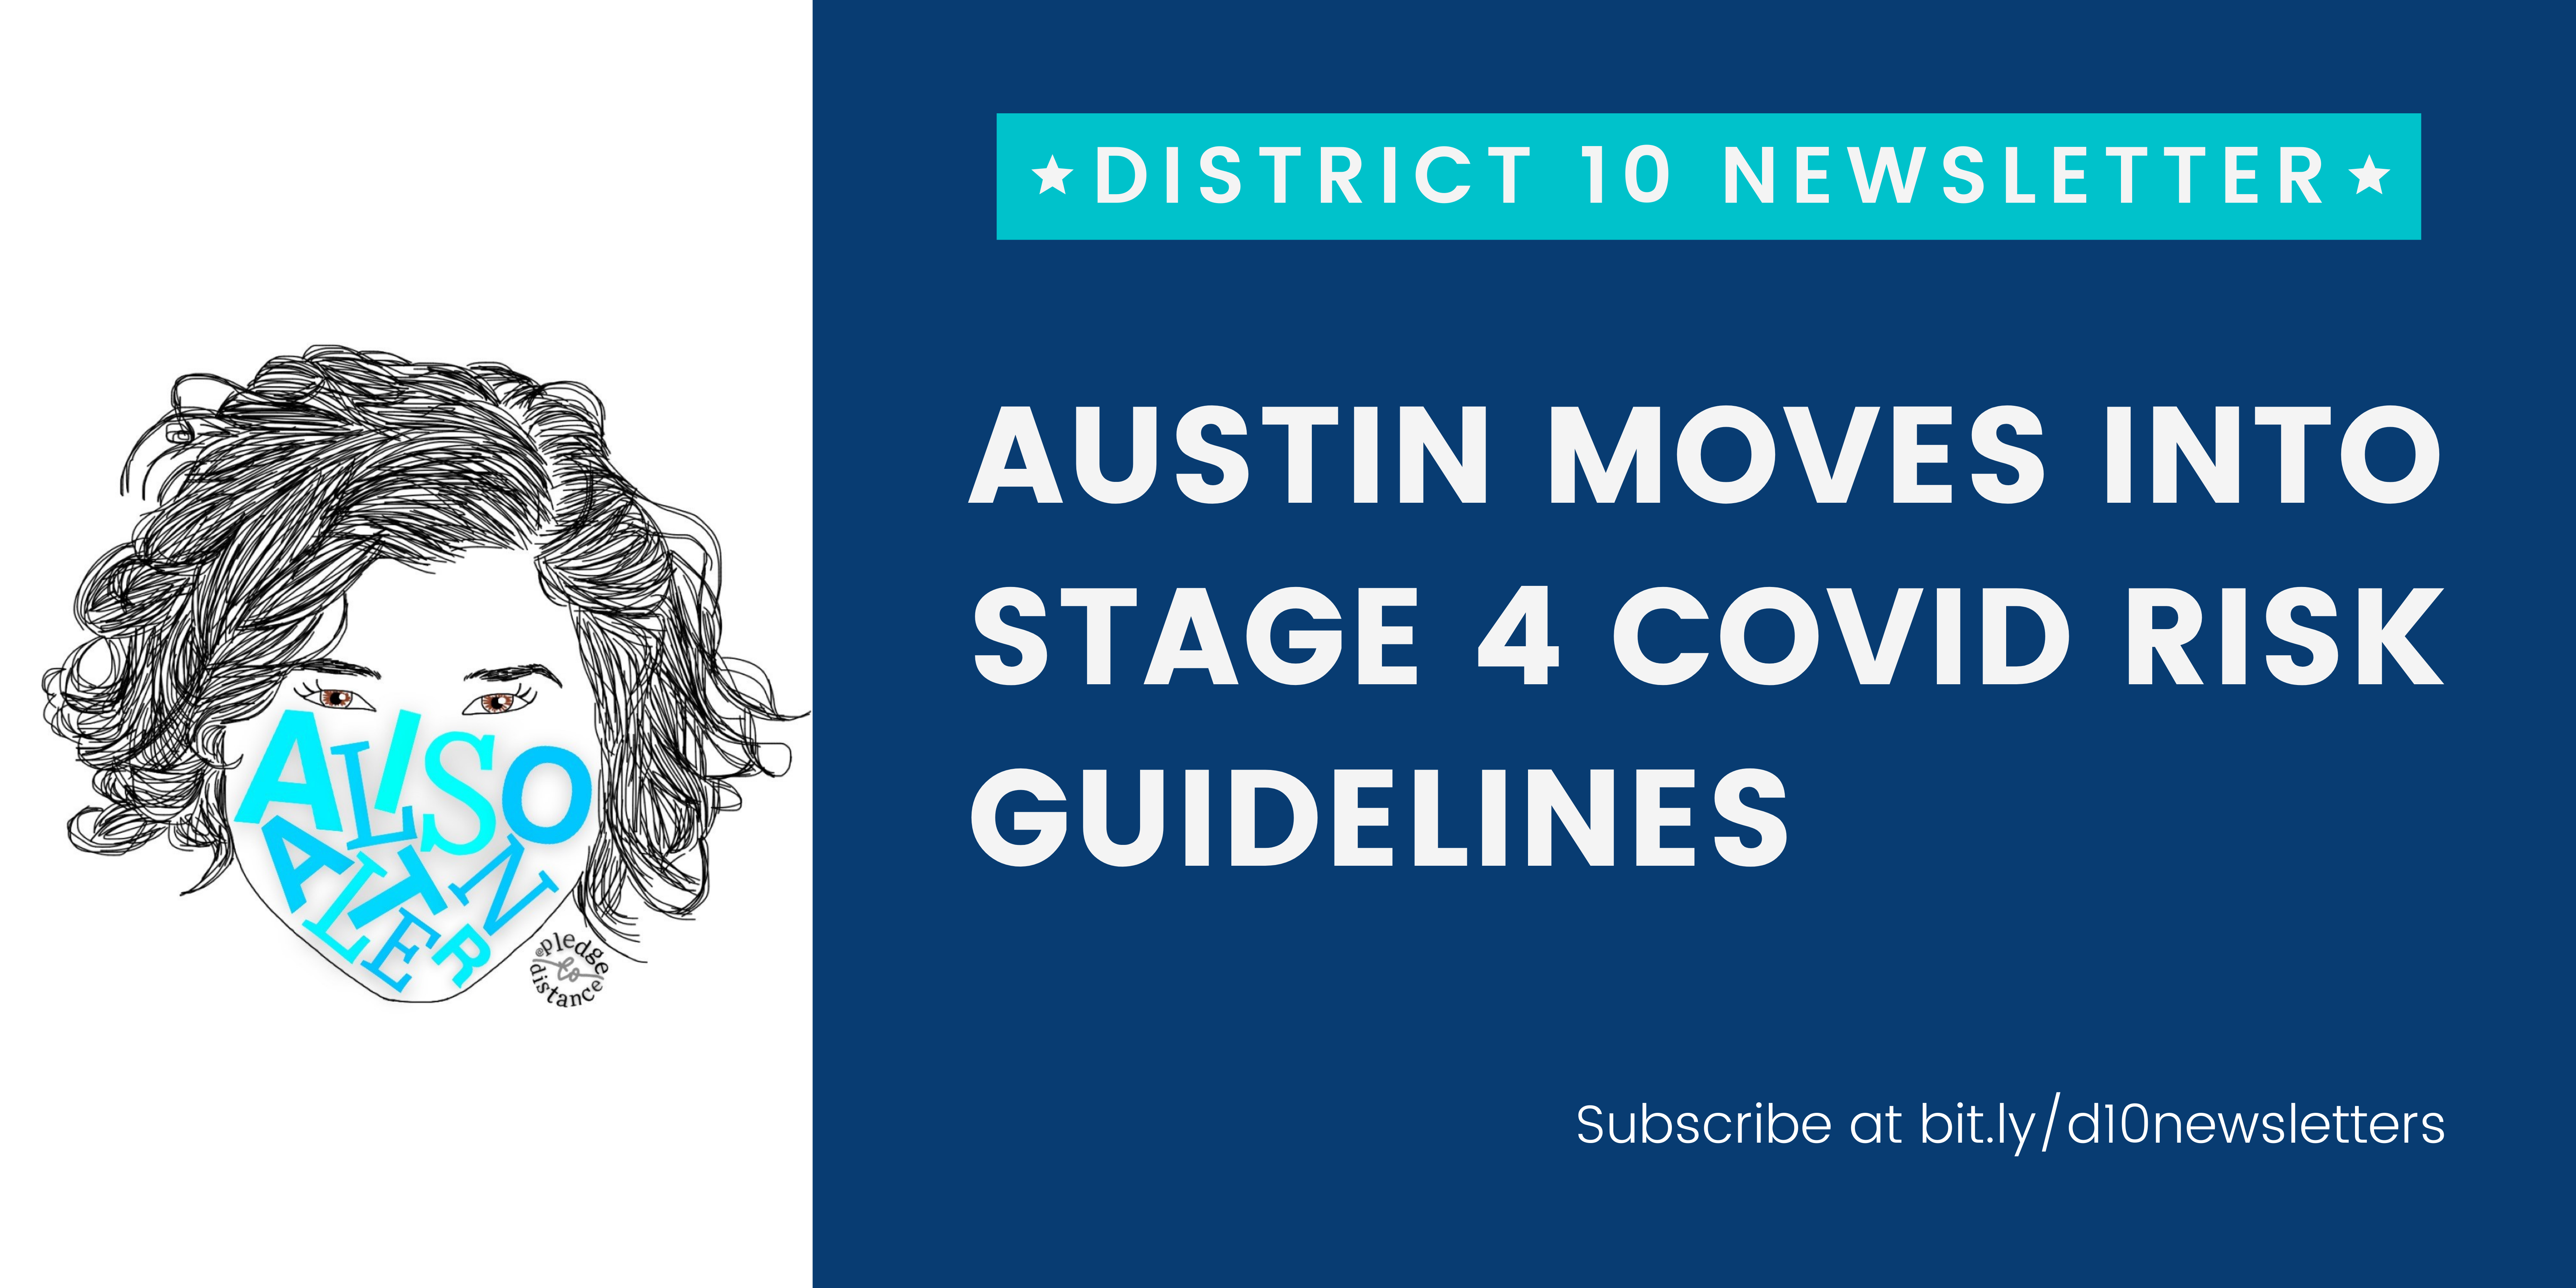 District 10 Newsletter; Power Outage Meetings with Austin Energy. Subscribe at bit.ly/d10newsletters